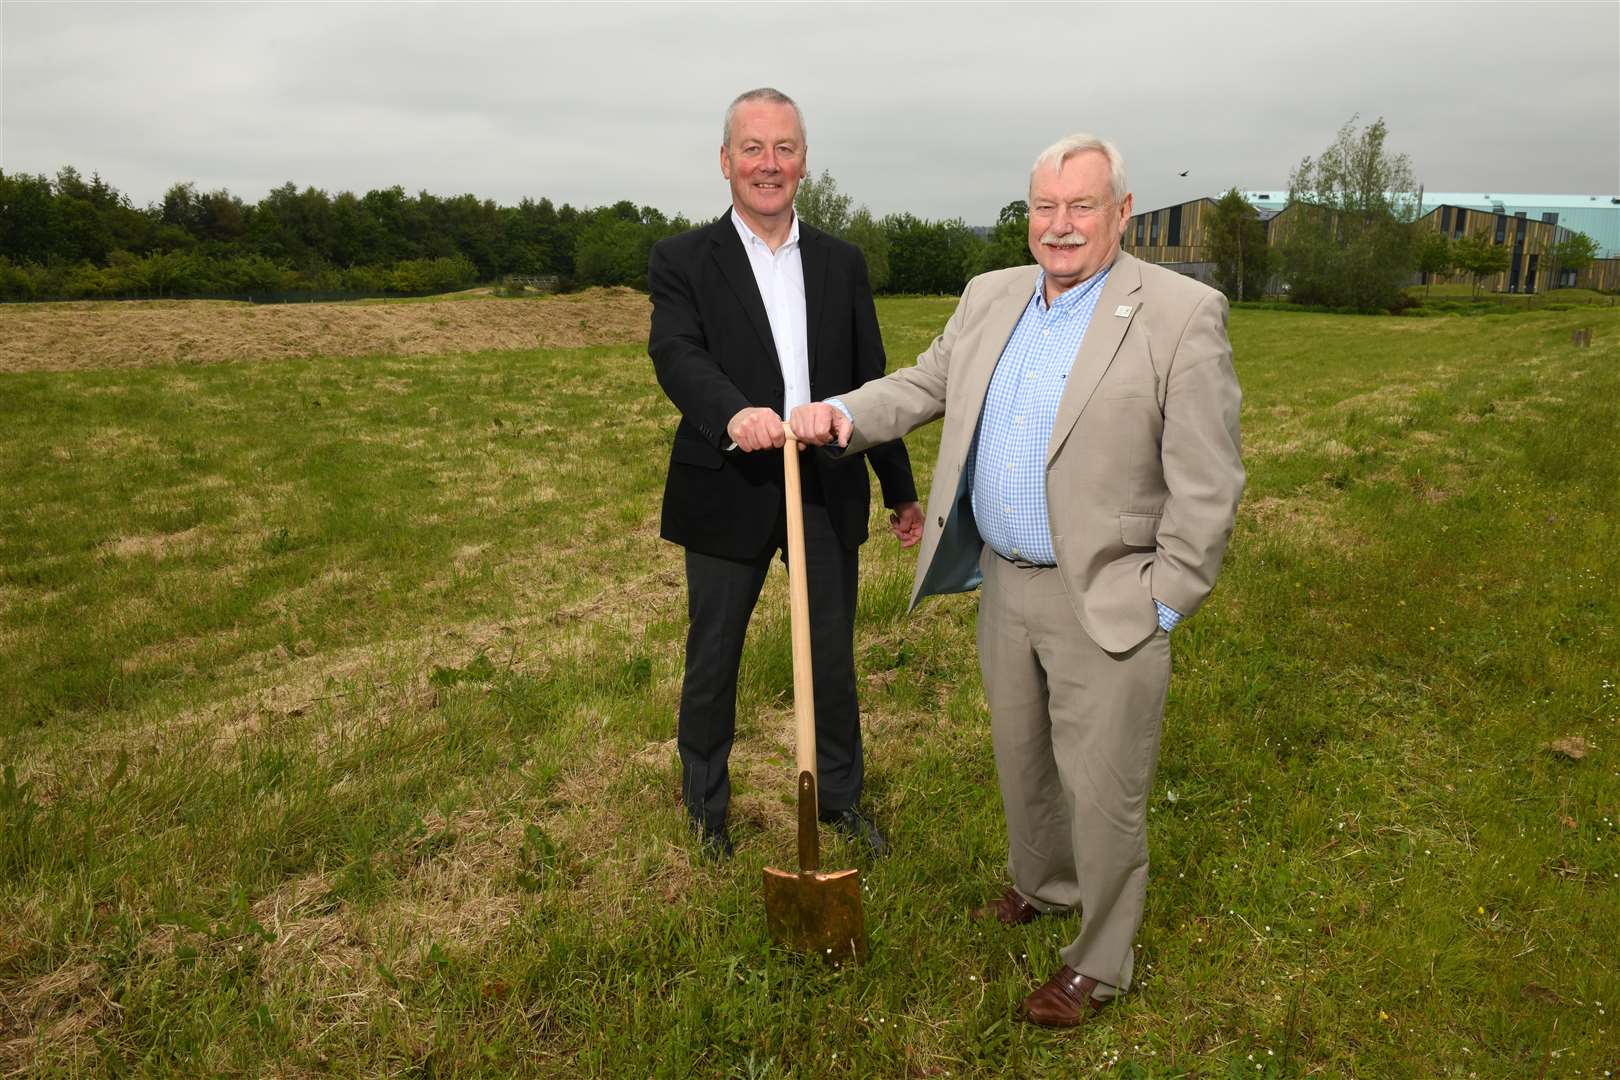 Ruaraidh MacNeil, director of business infrastructure for Highlands and Islands Enterprise, and SRUC Principal, Professor Wayne Powell, at the site of the new rural and veterinary innovation centre at Inverness Campus.